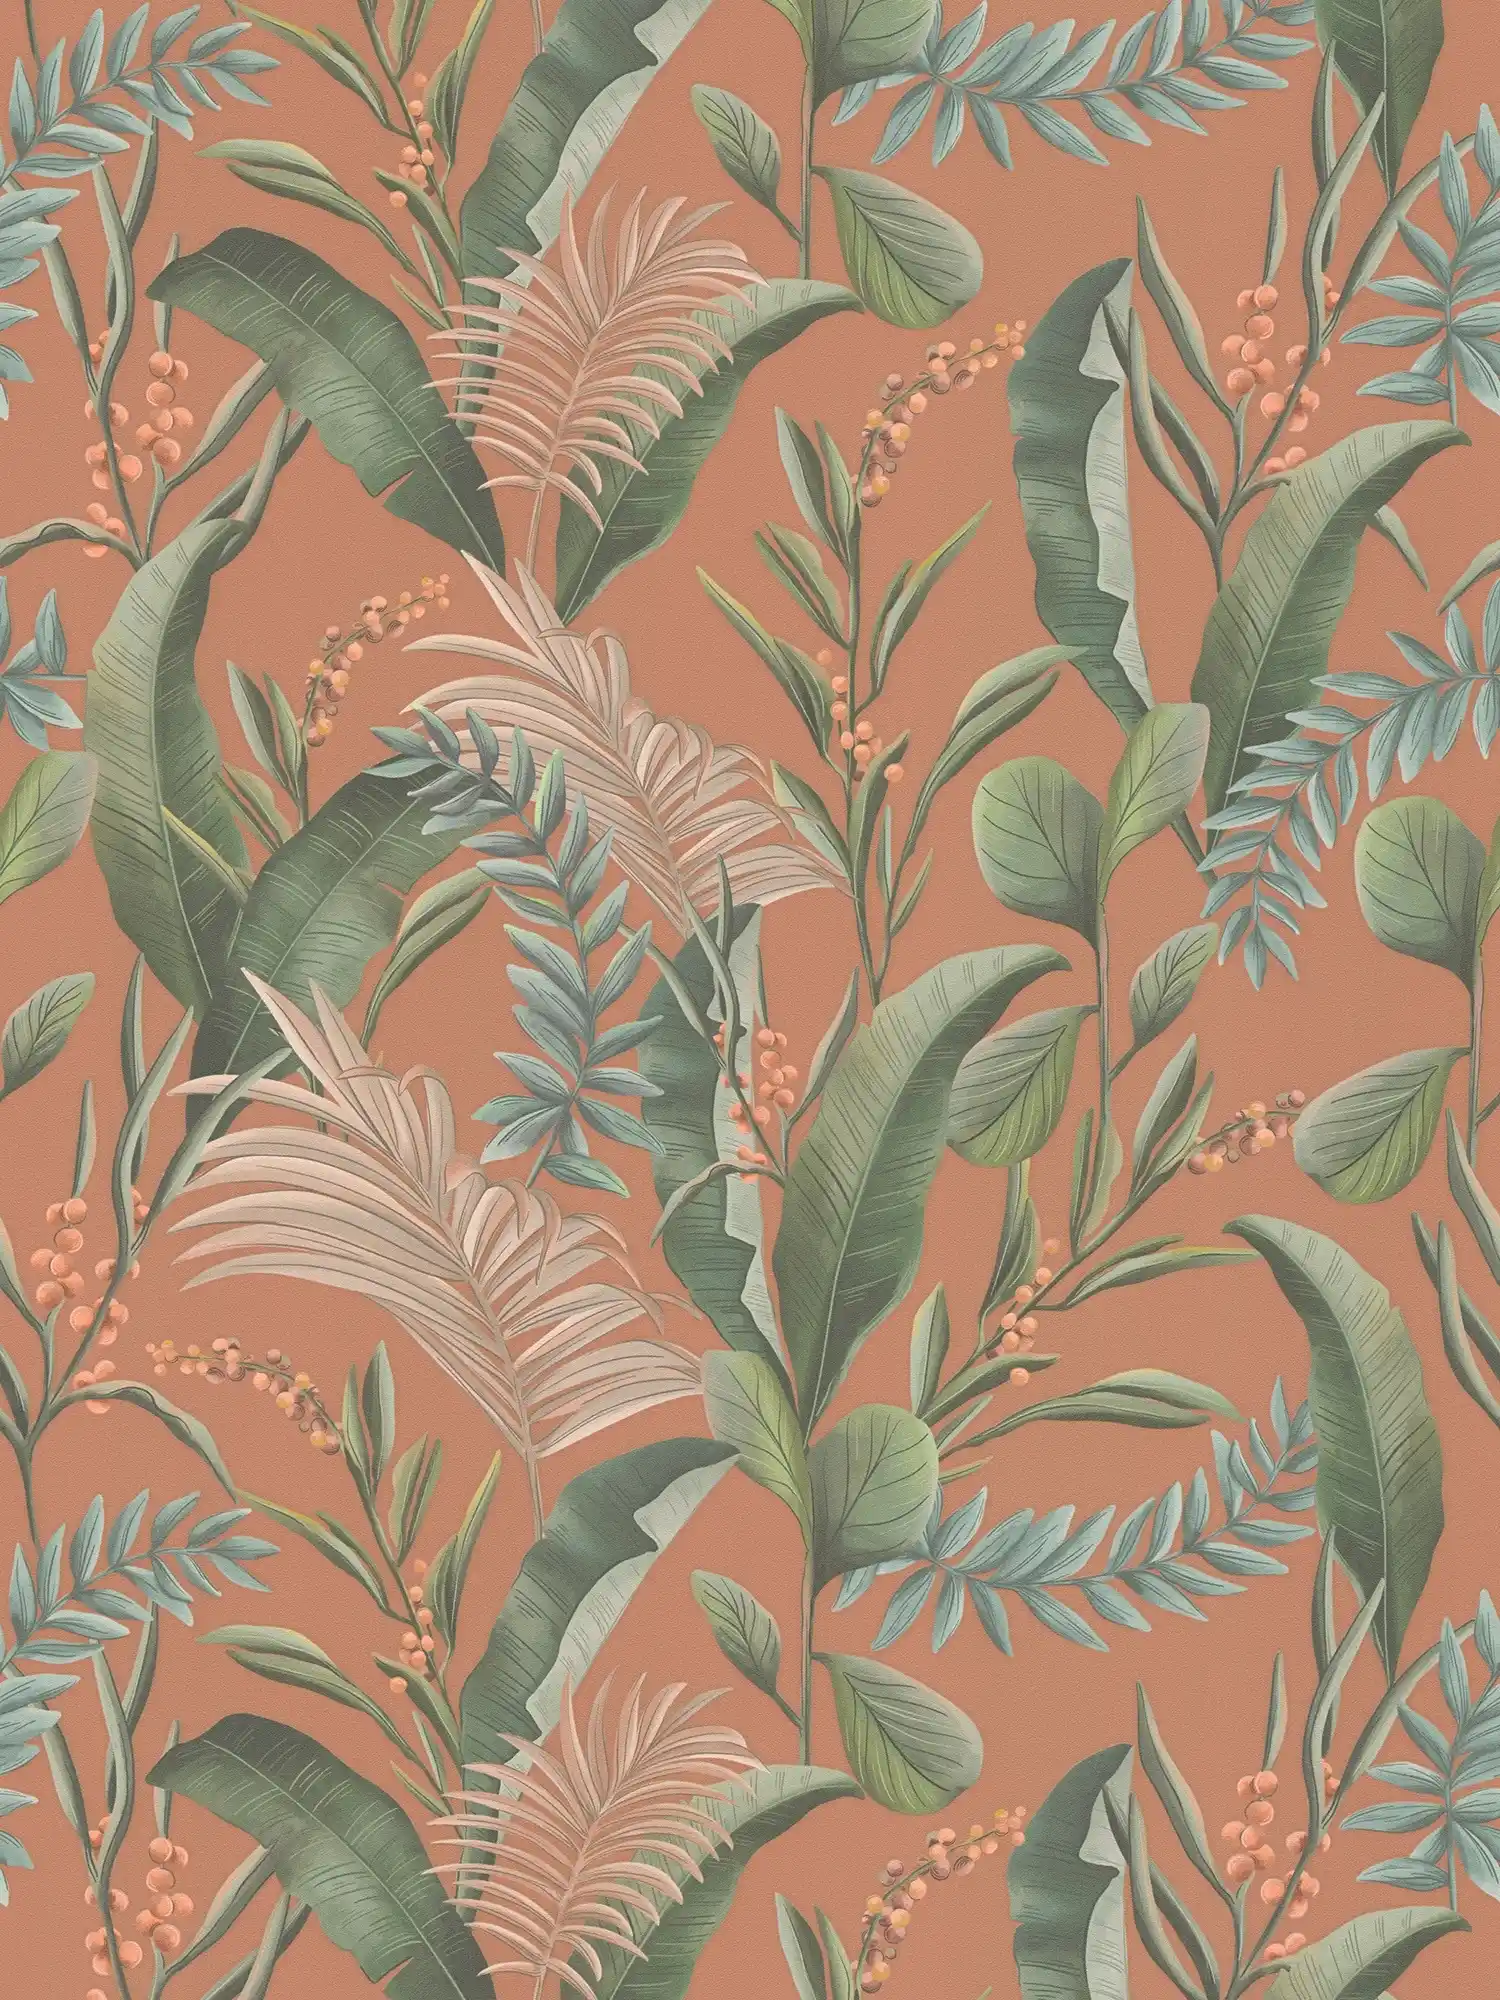 Floral jungle wallpaper with leaves matt textured - orange, red, green
